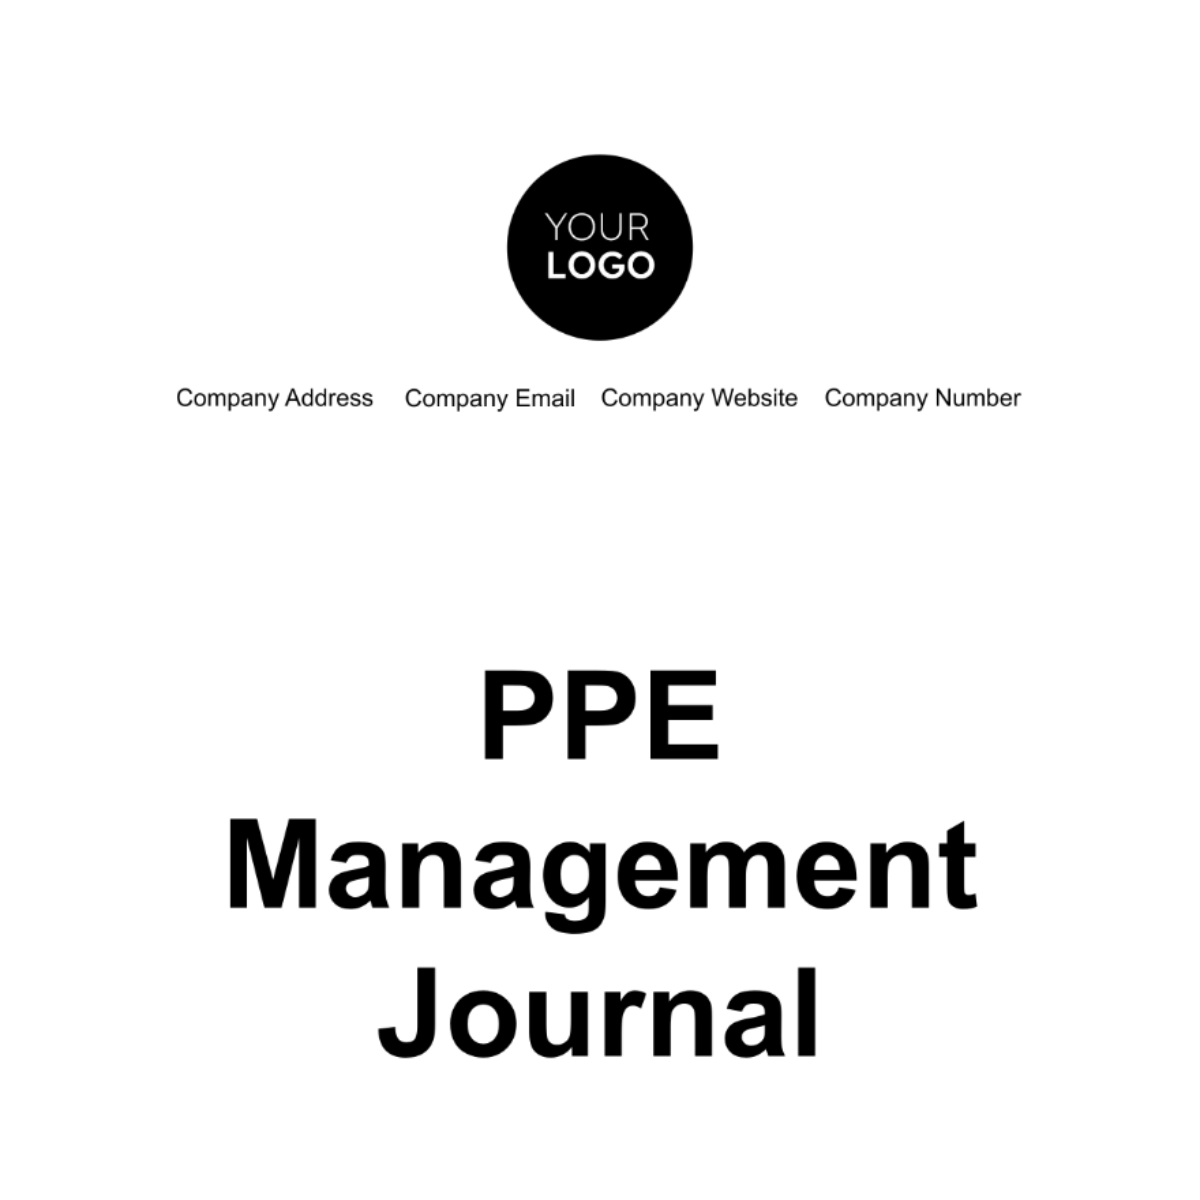 PPE Management Journal Template